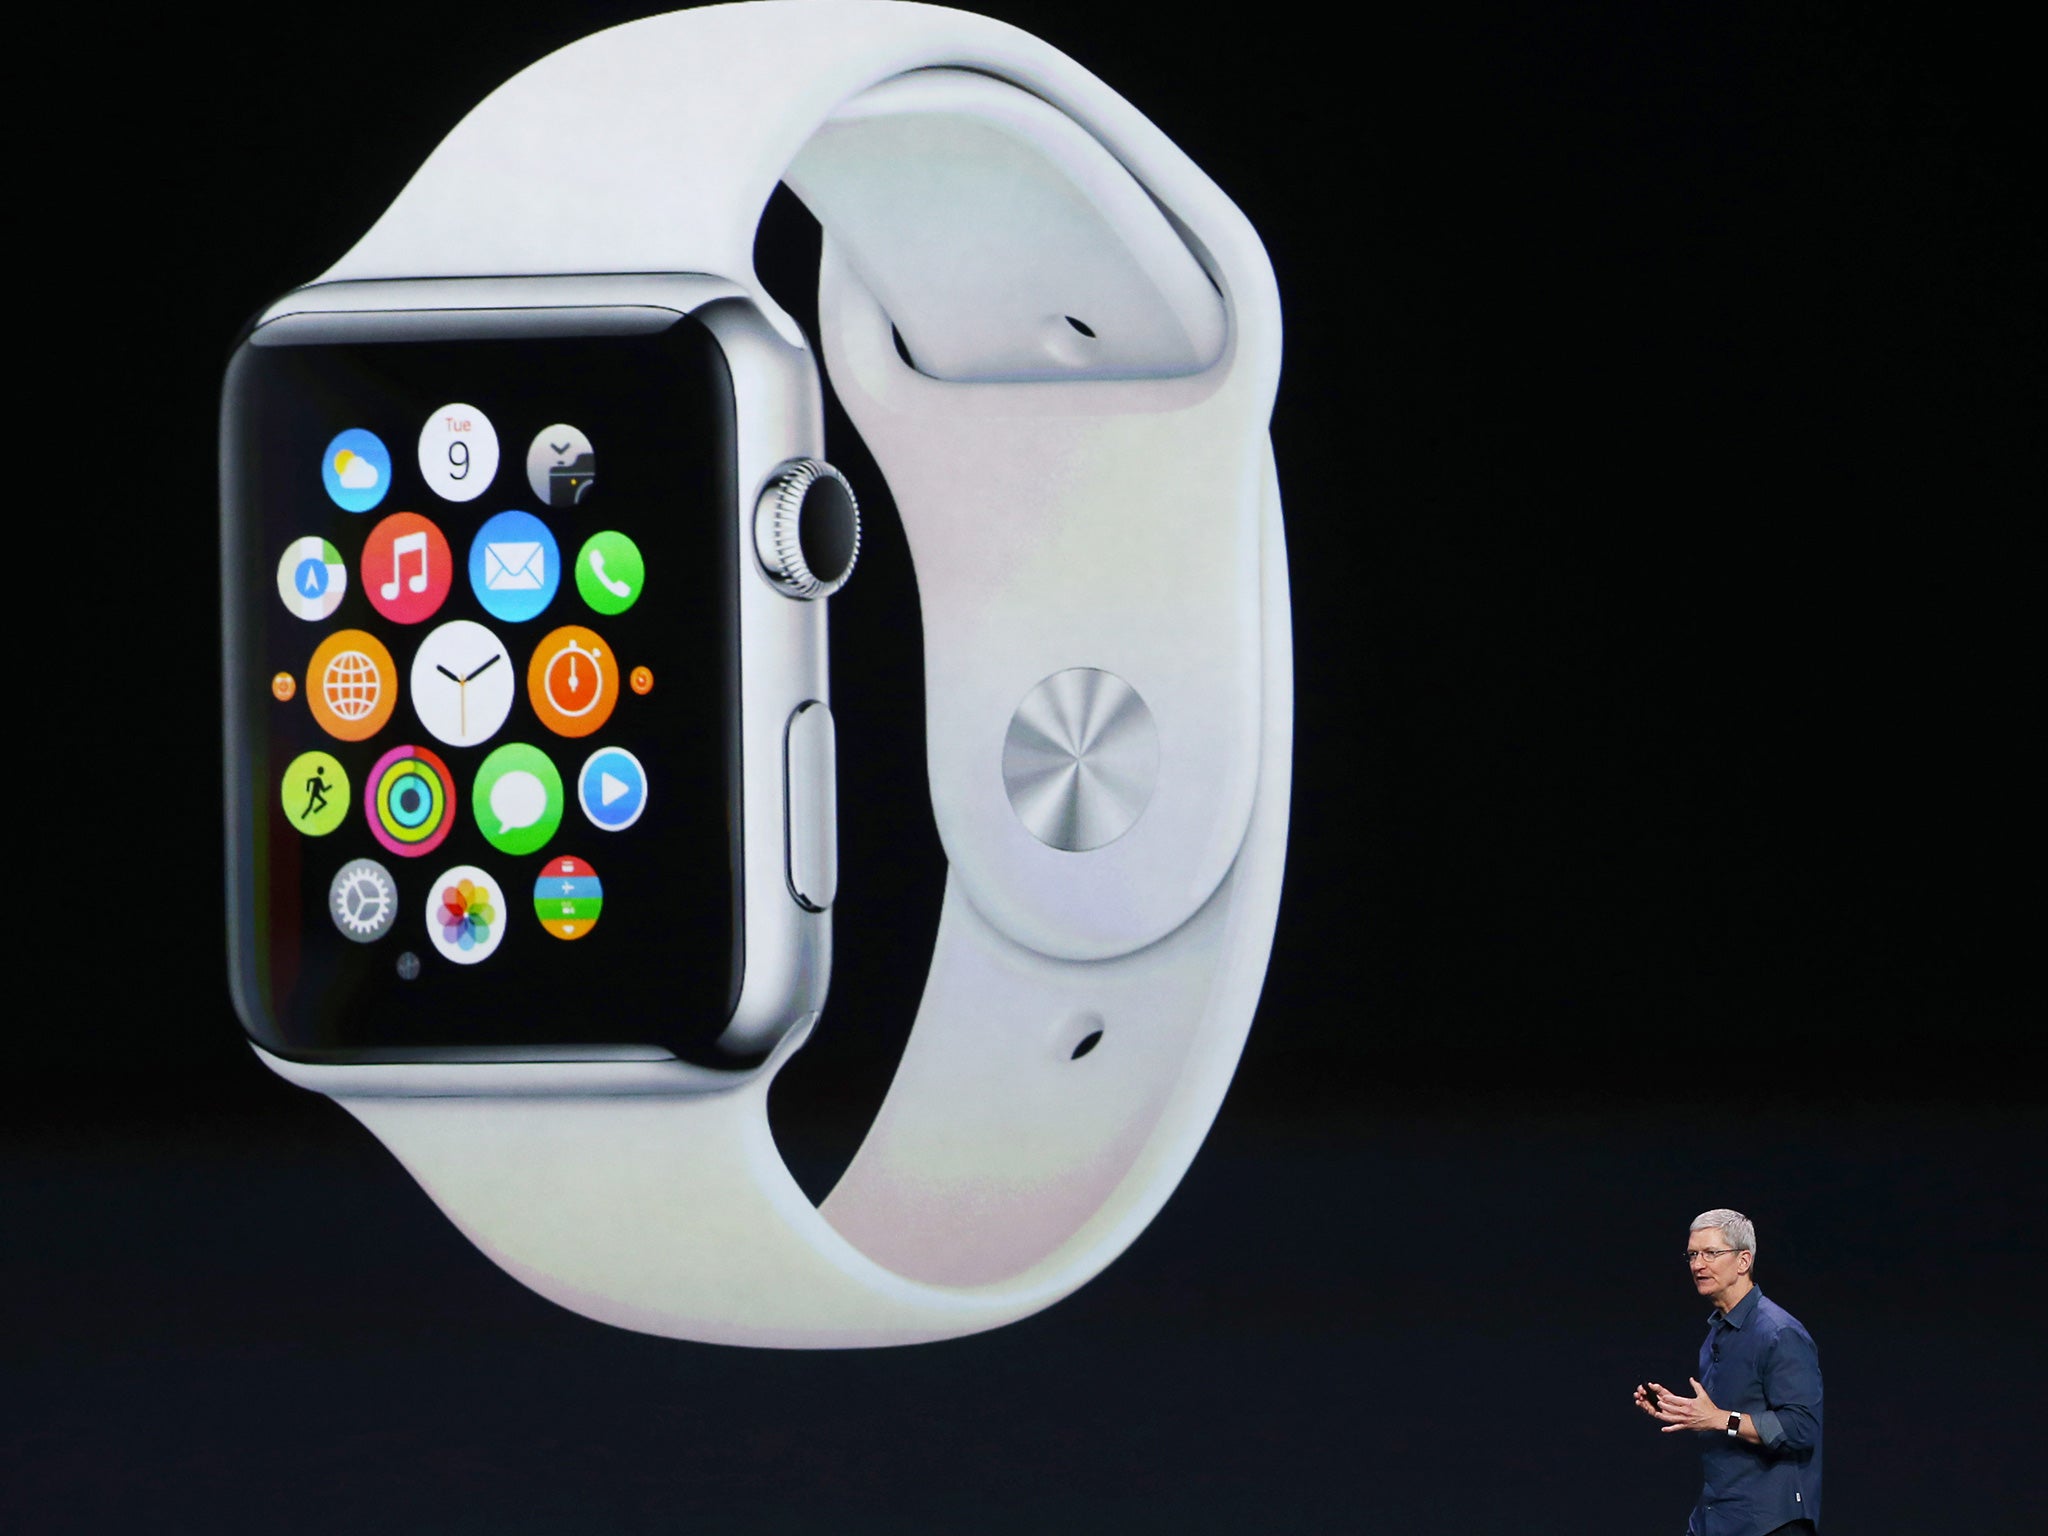 Apple CEO Tim Cook announces the Apple Watch during an Apple special even